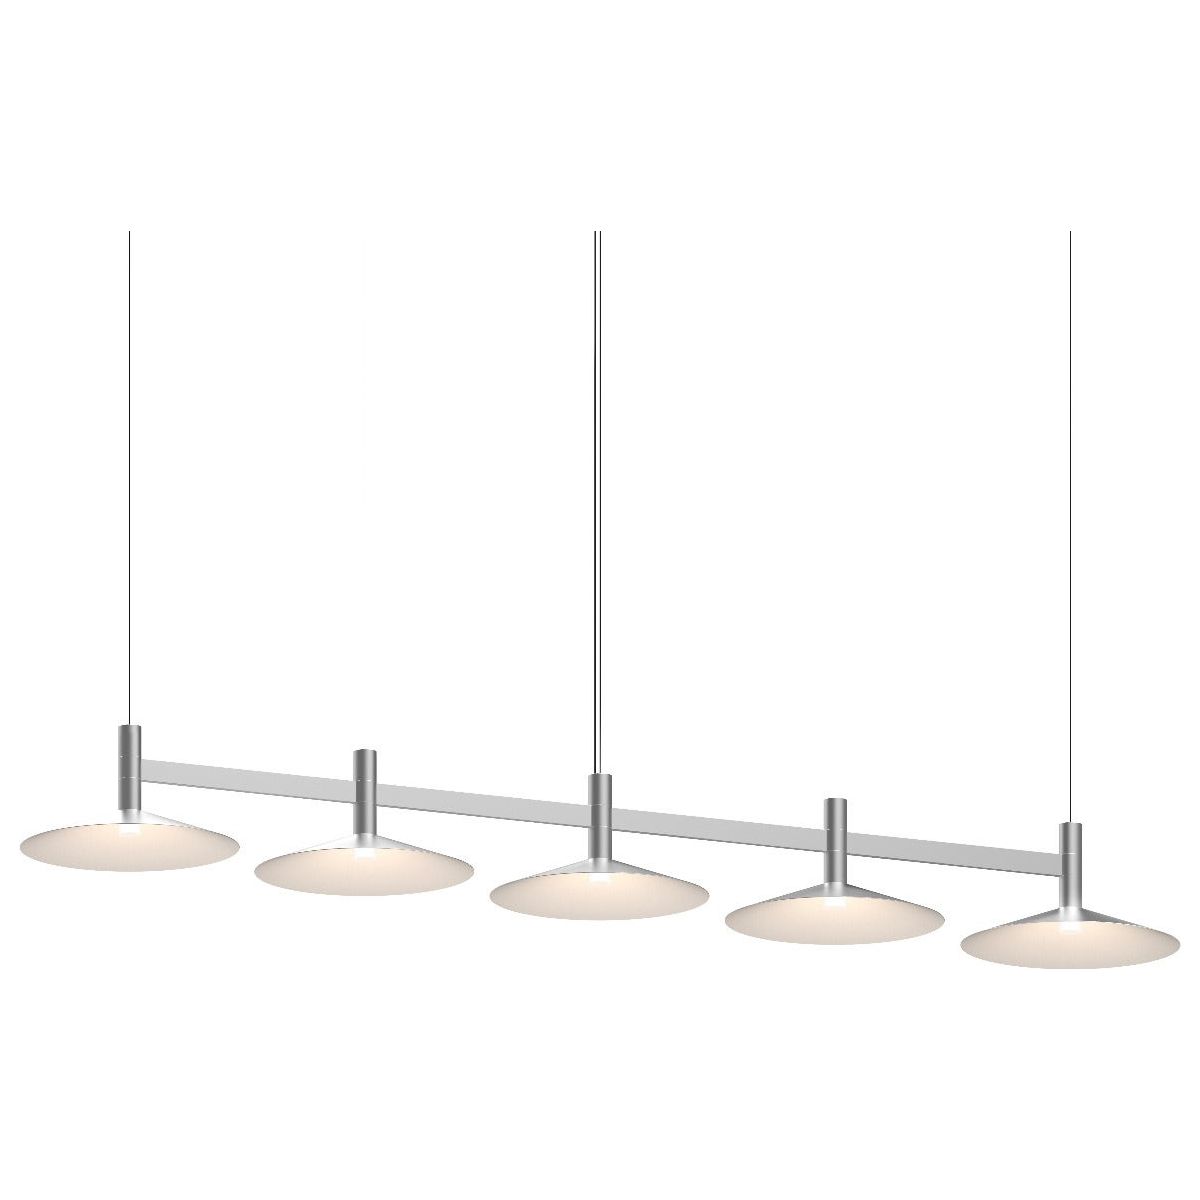 Systema Staccato 5-Light Linear Pendant with Shallow Cone Shades